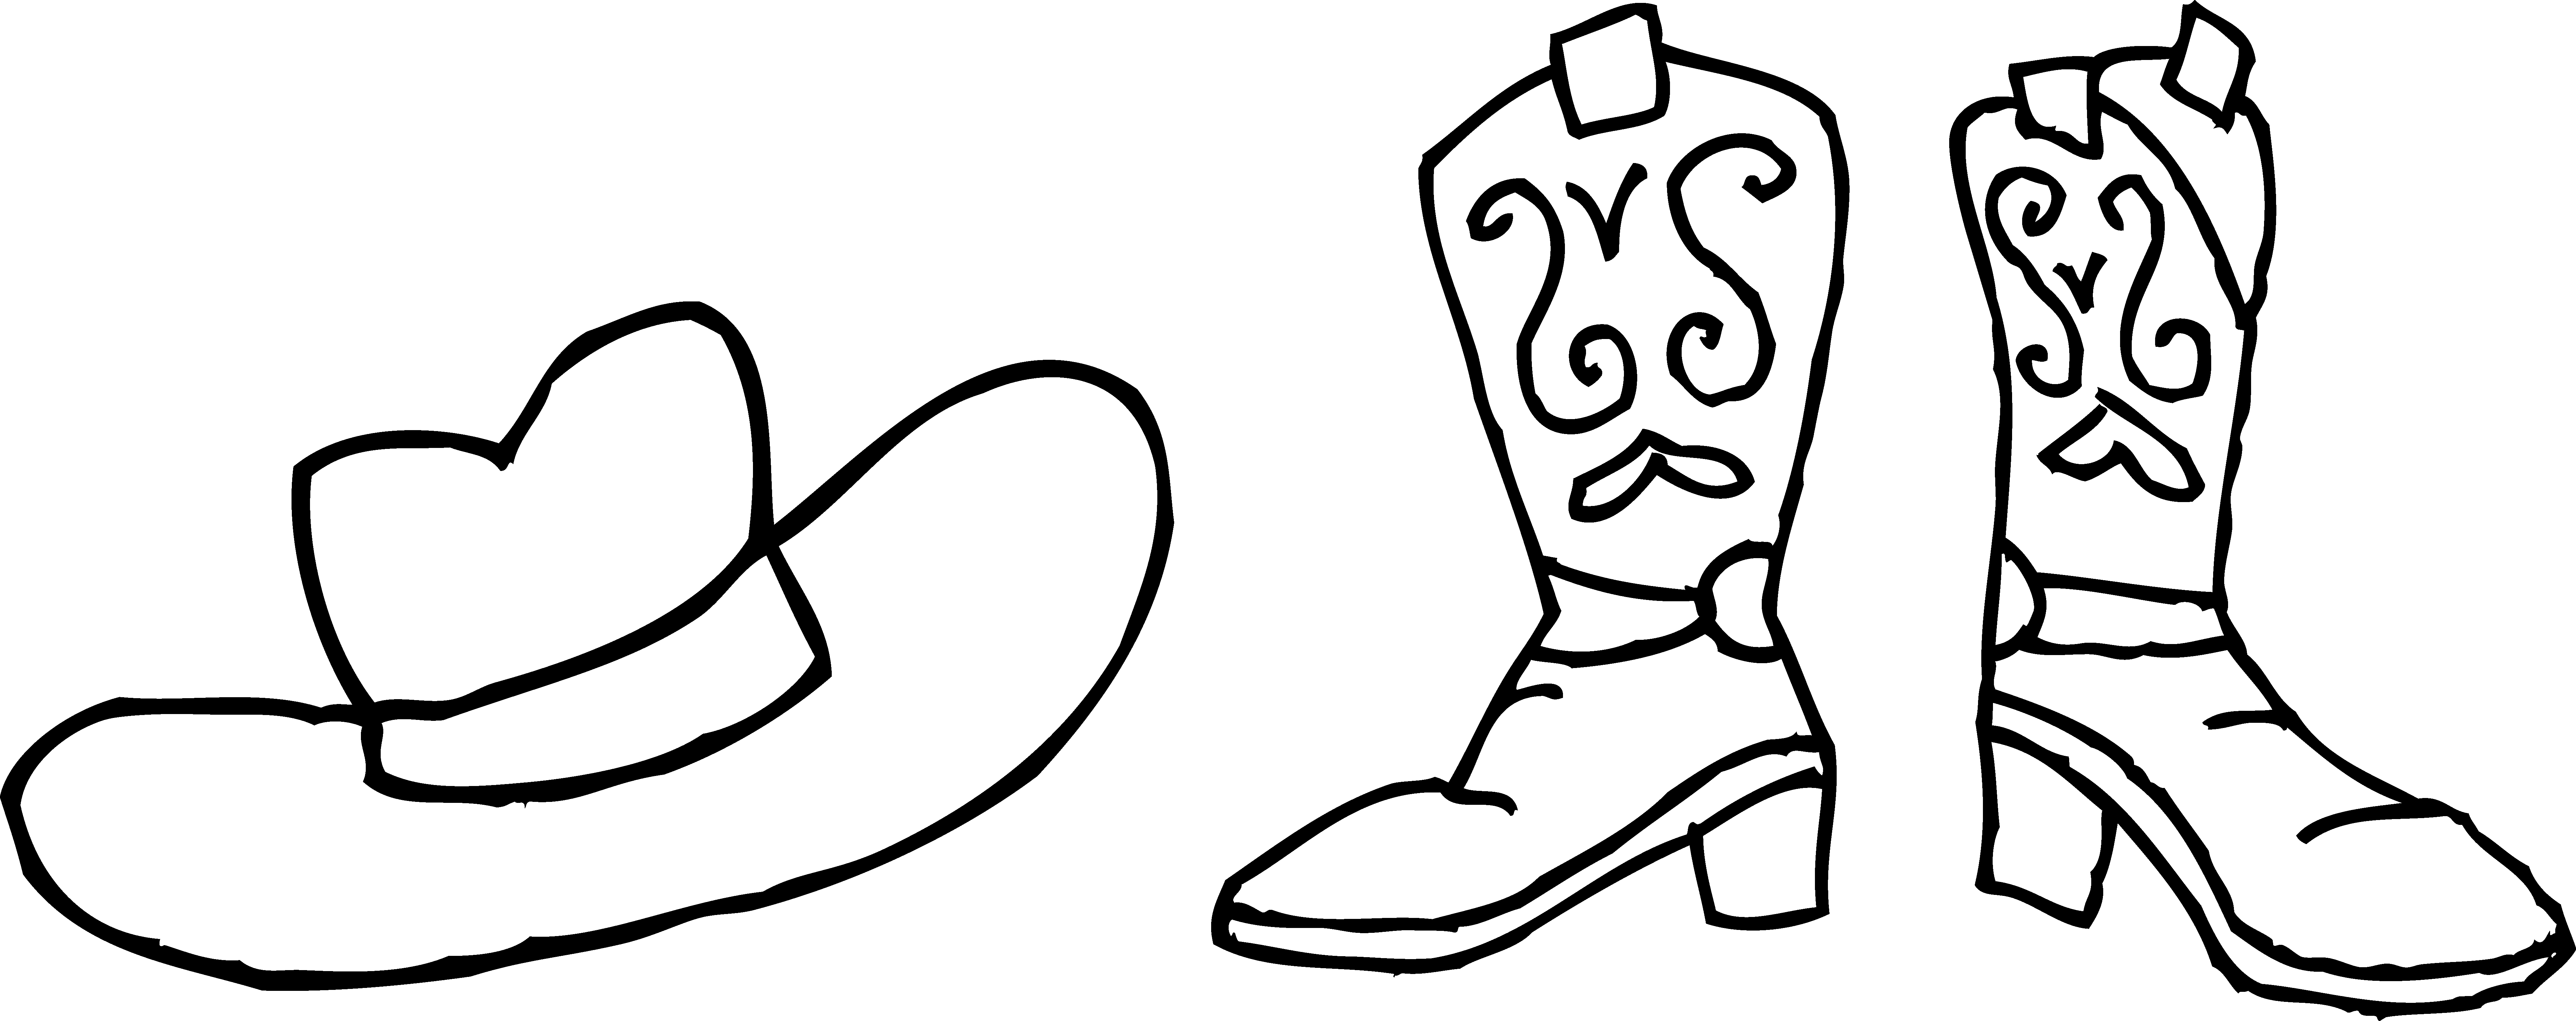 57 Cute Cowboy Boot Coloring Page for Kids